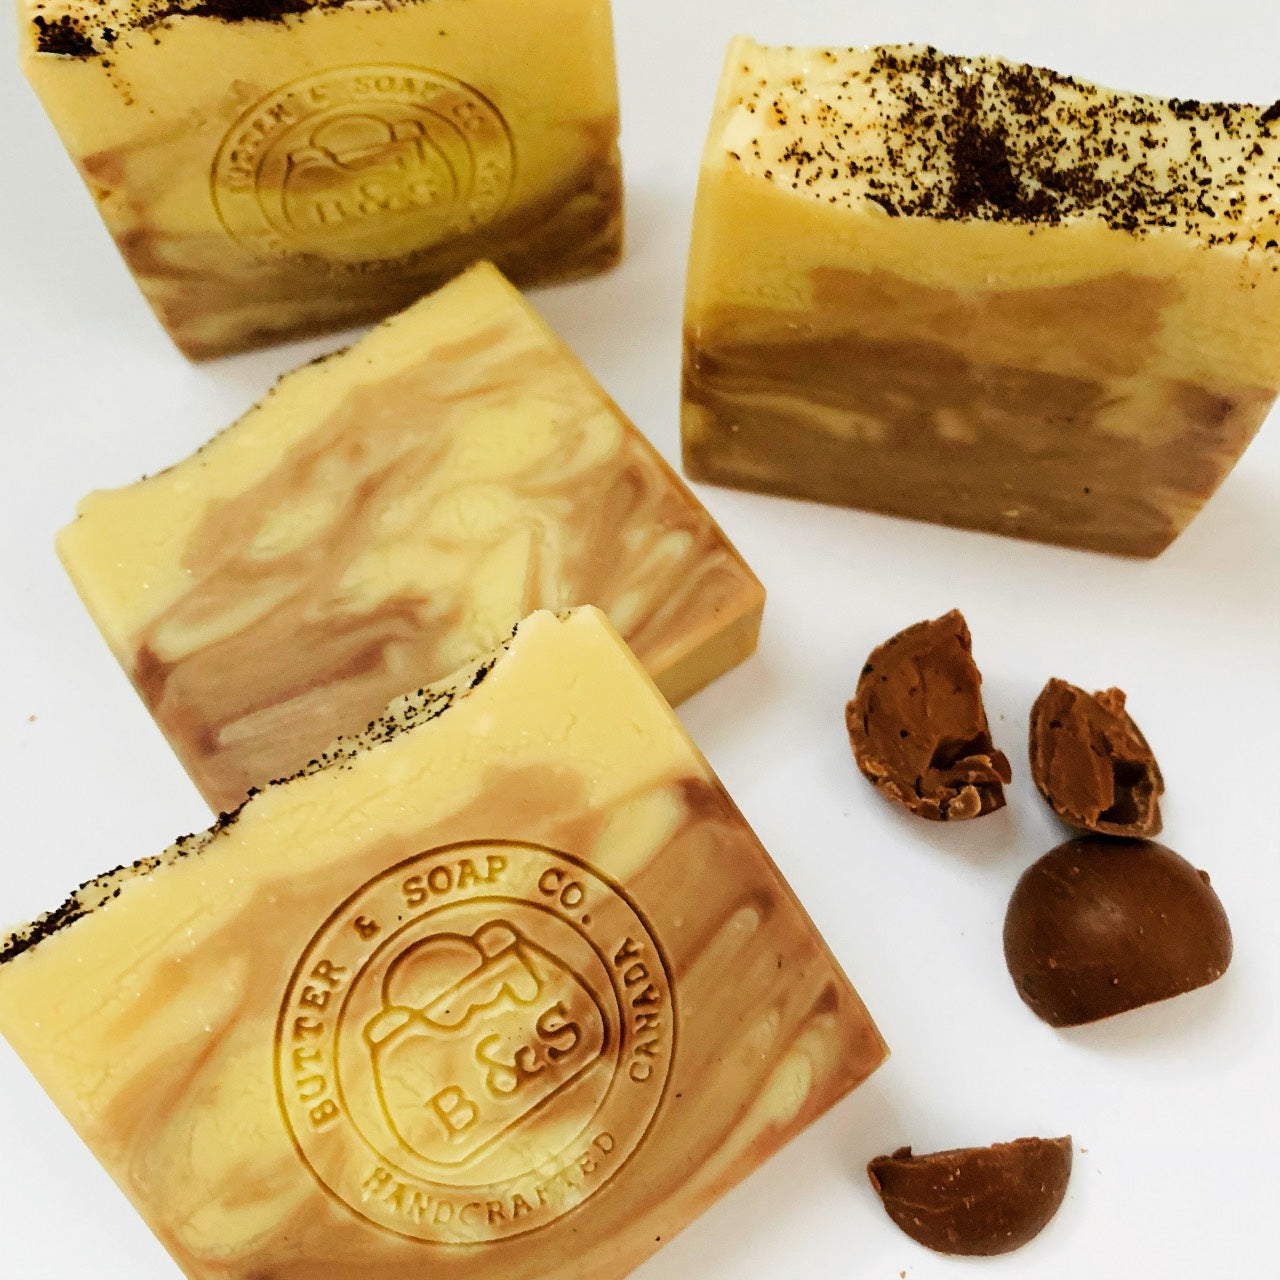 Natural Shea Butter Chocolate Soap